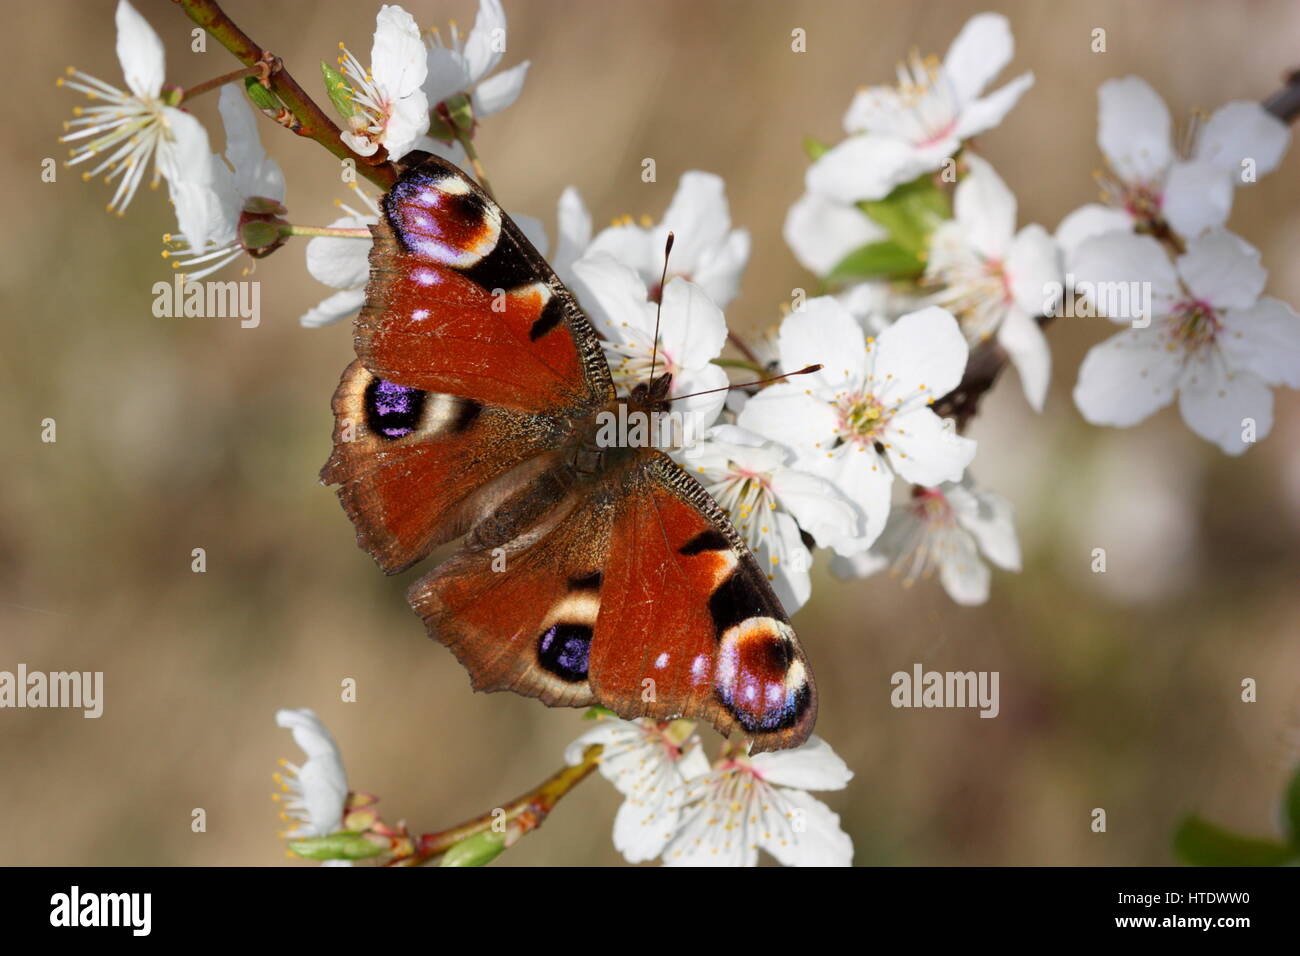 Peacock Butterfly nectaring on Spring blossom Stock Photo